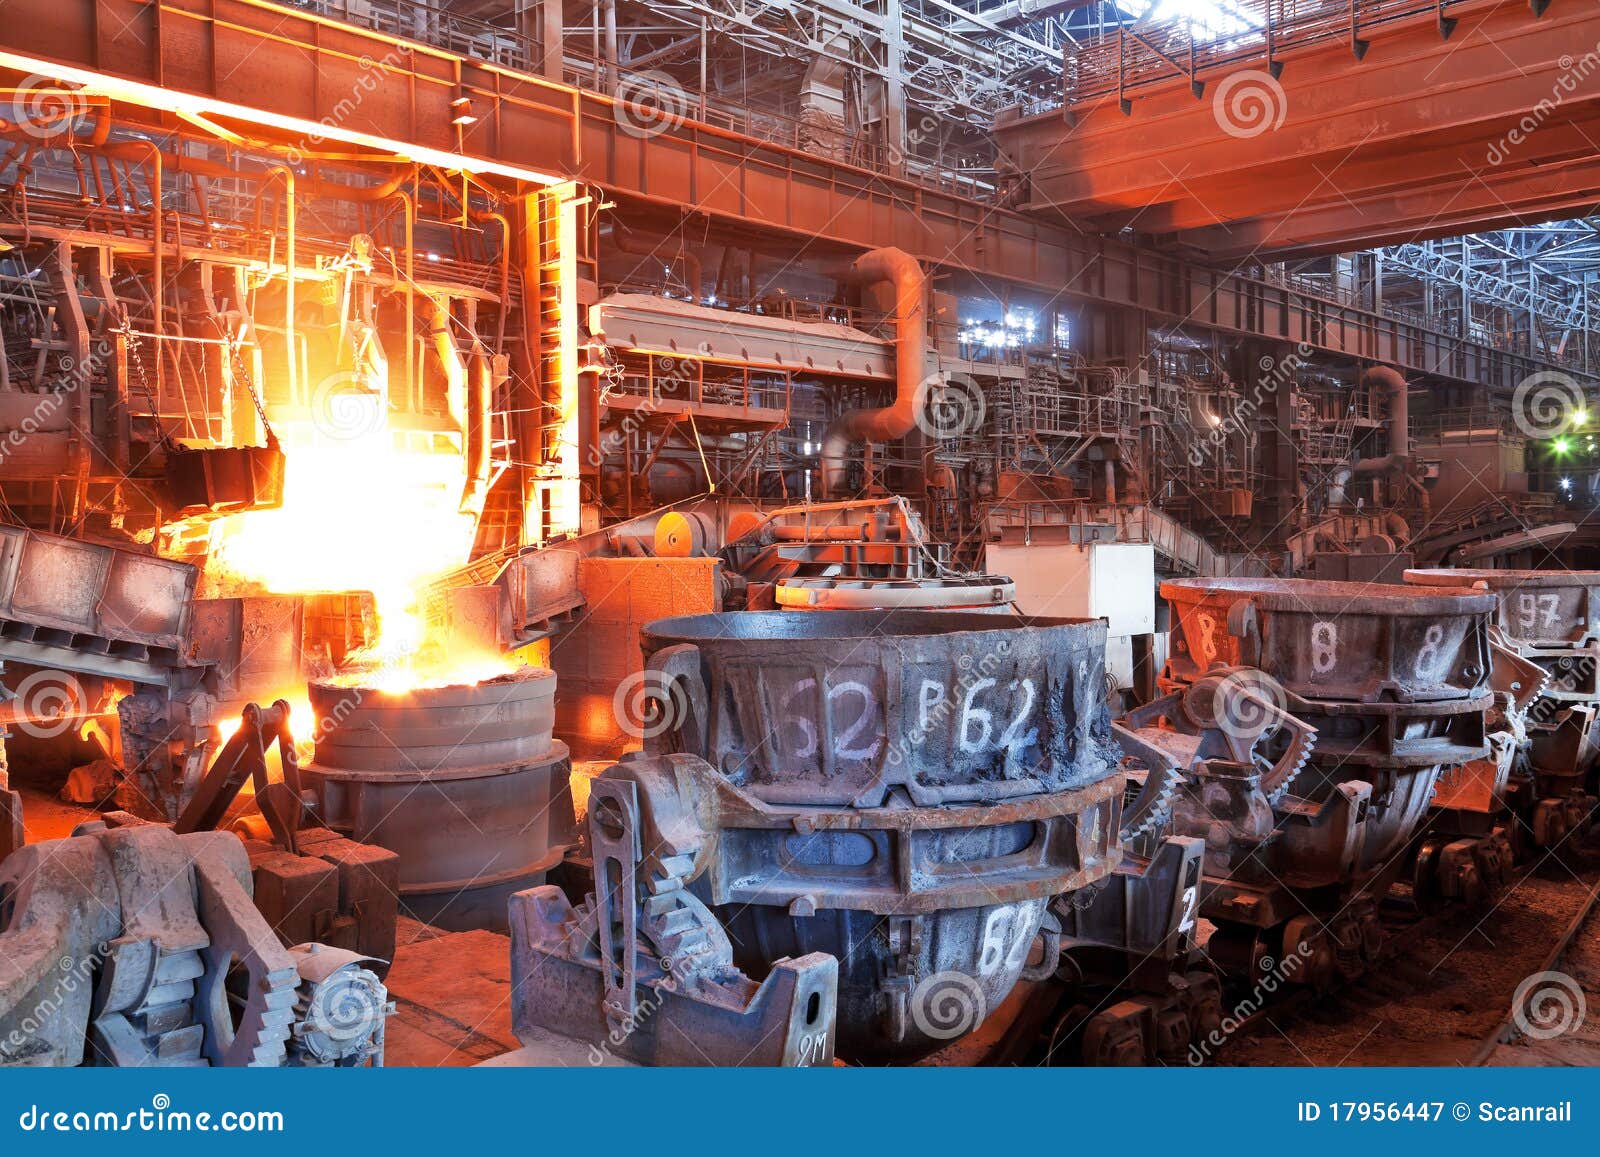 open-hearth workshop of metallurgical plant